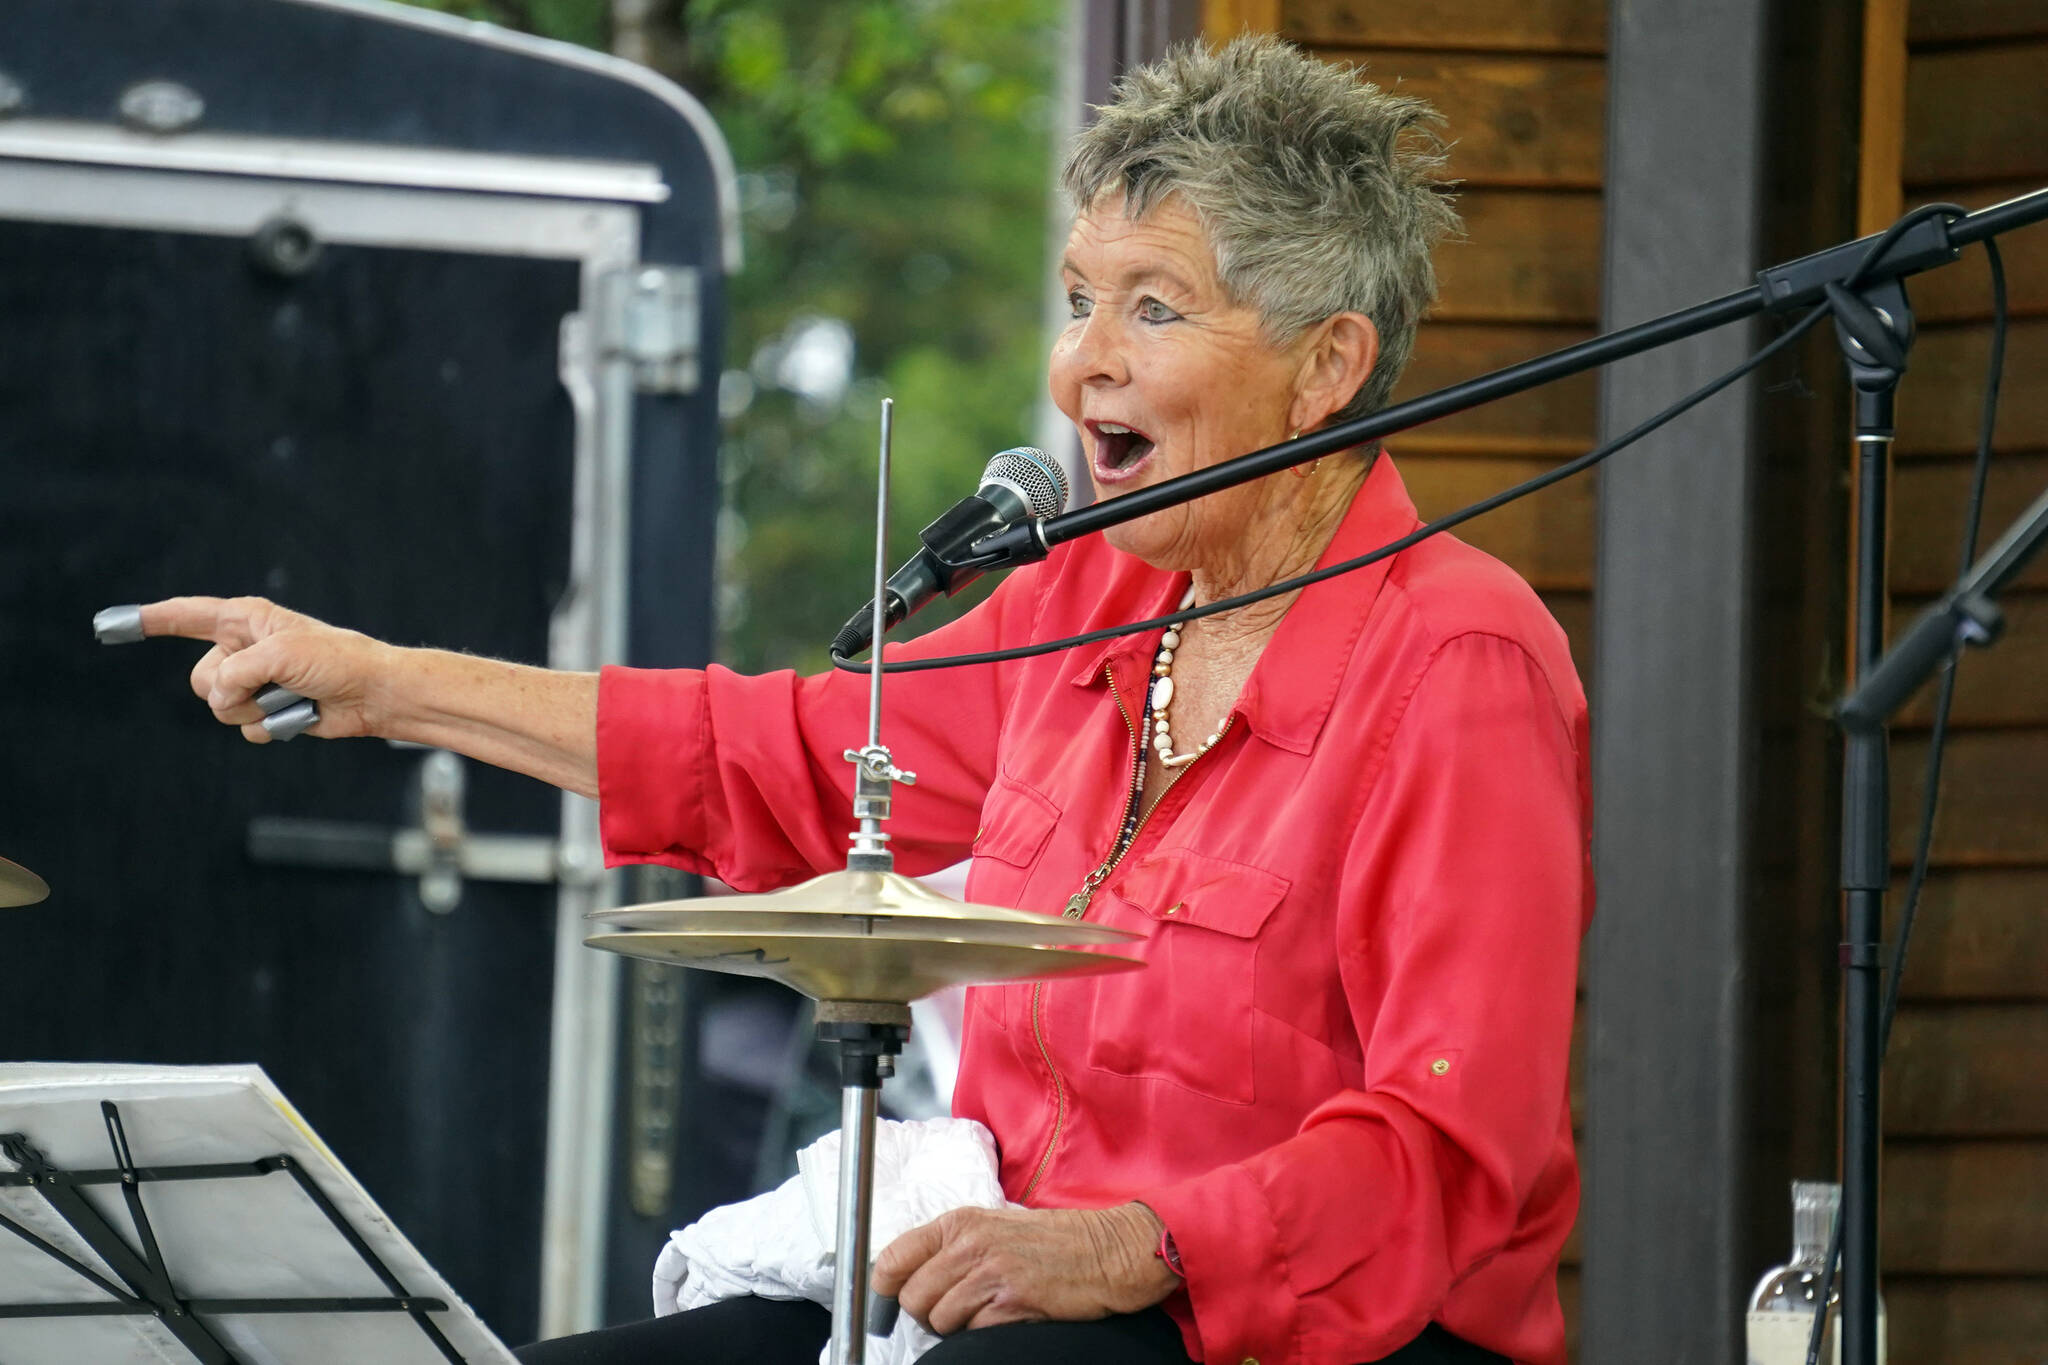 Connie Brannock, part of Connie Brannock’s Tiny House of Funk, performs during the Soldotna Music Series at Soldotna Creek Park in Soldotna, Alaska, on Wednesday, June 21, 2023. (Jake Dye/Peninsula Clarion)